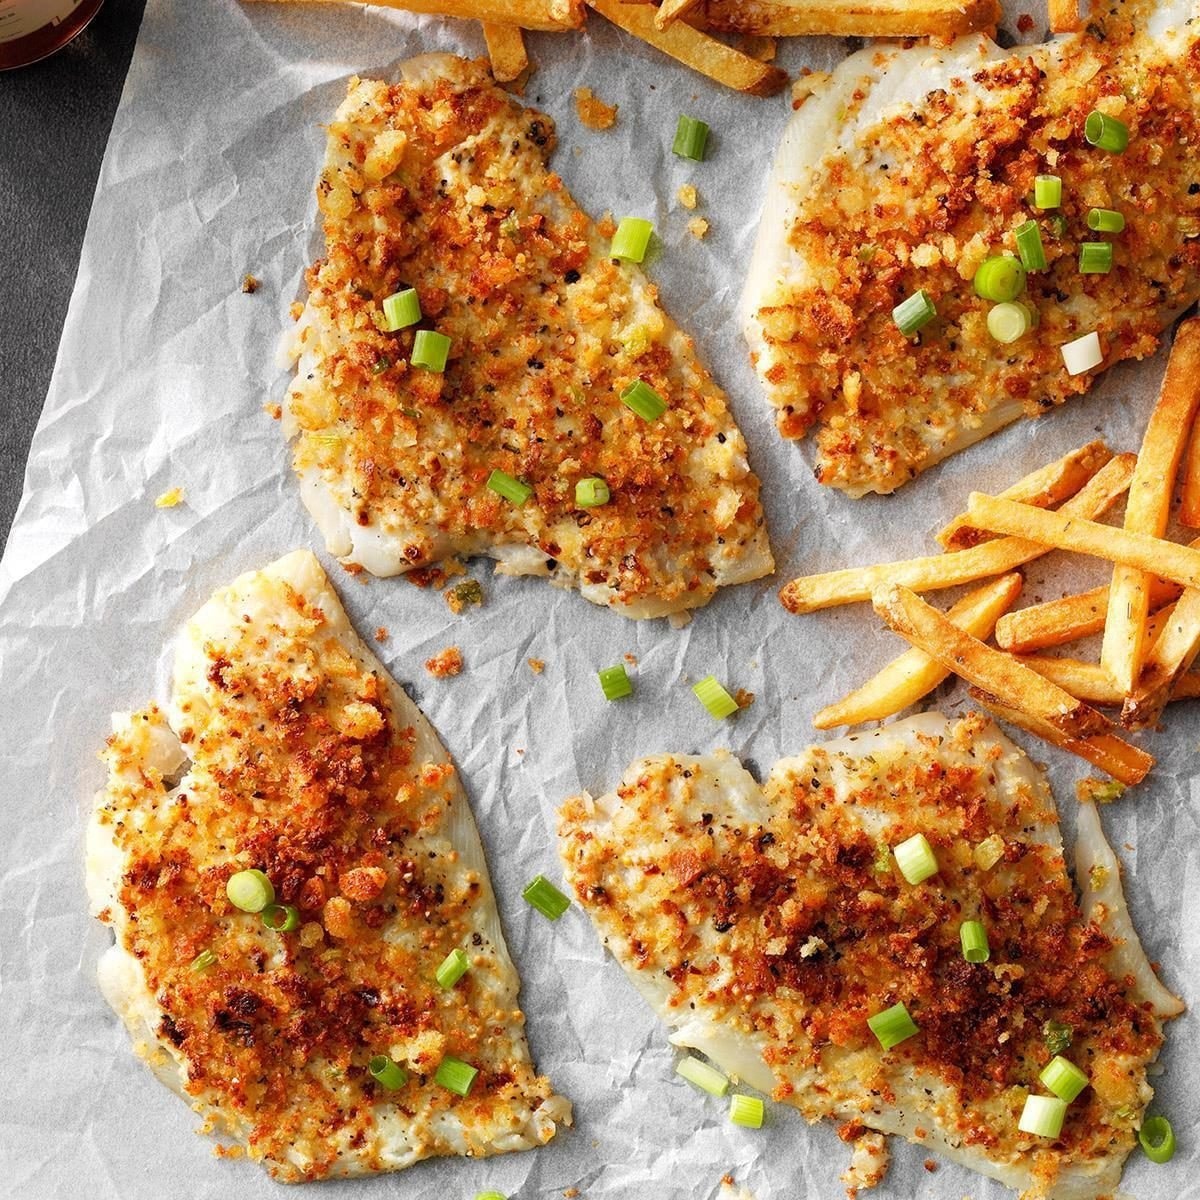 Air-fryer crumb-topped sole recipe